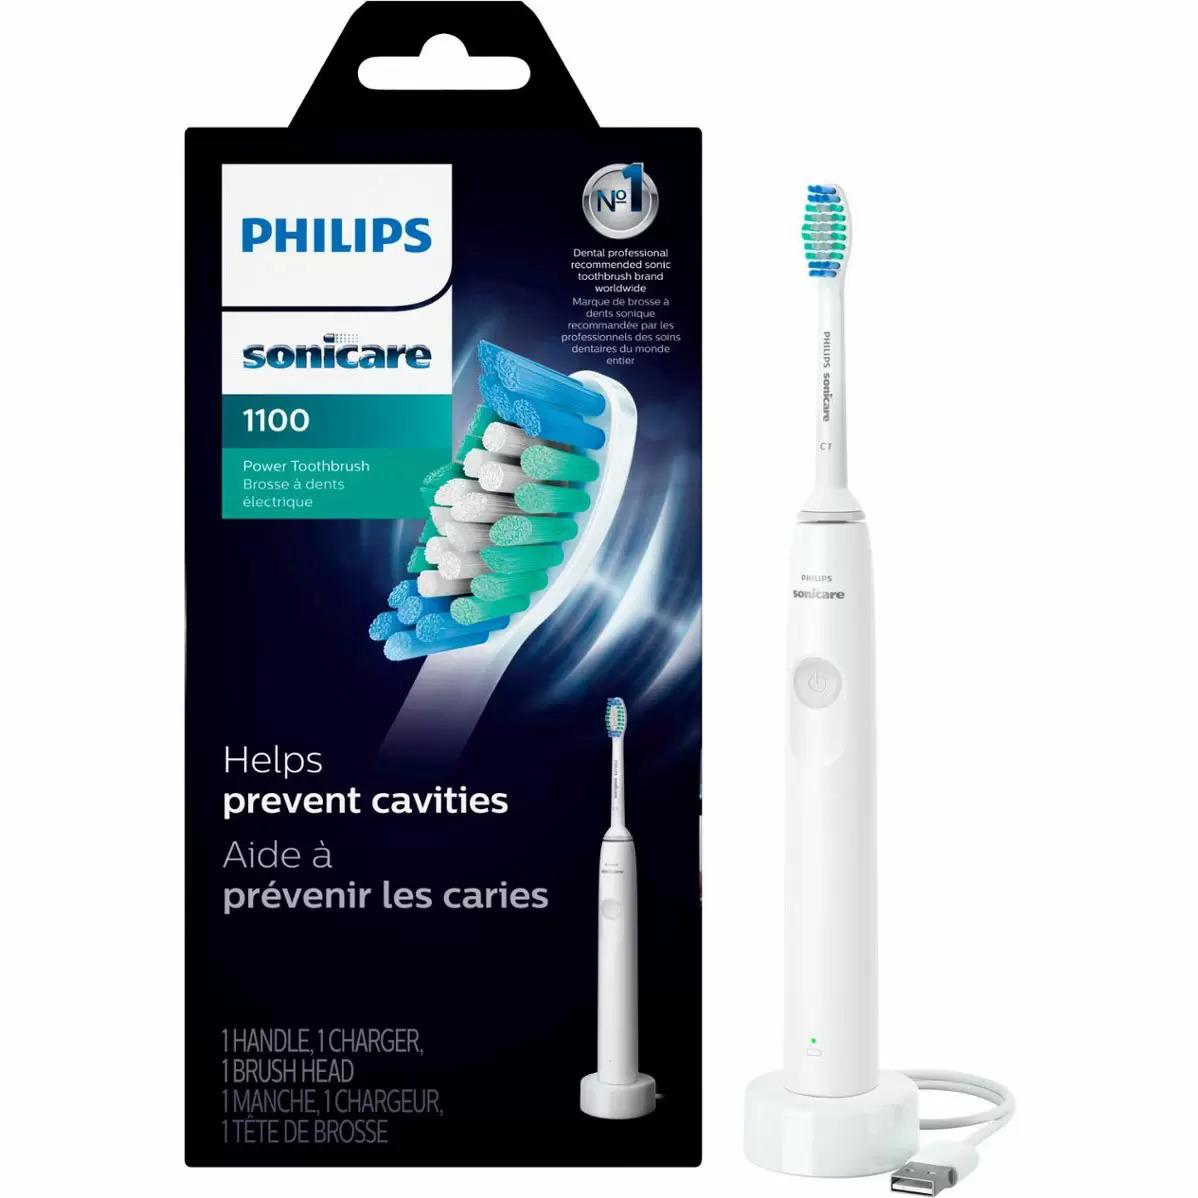 Philips 1100 Series Sonicare Electric Toothbrush for $19.96